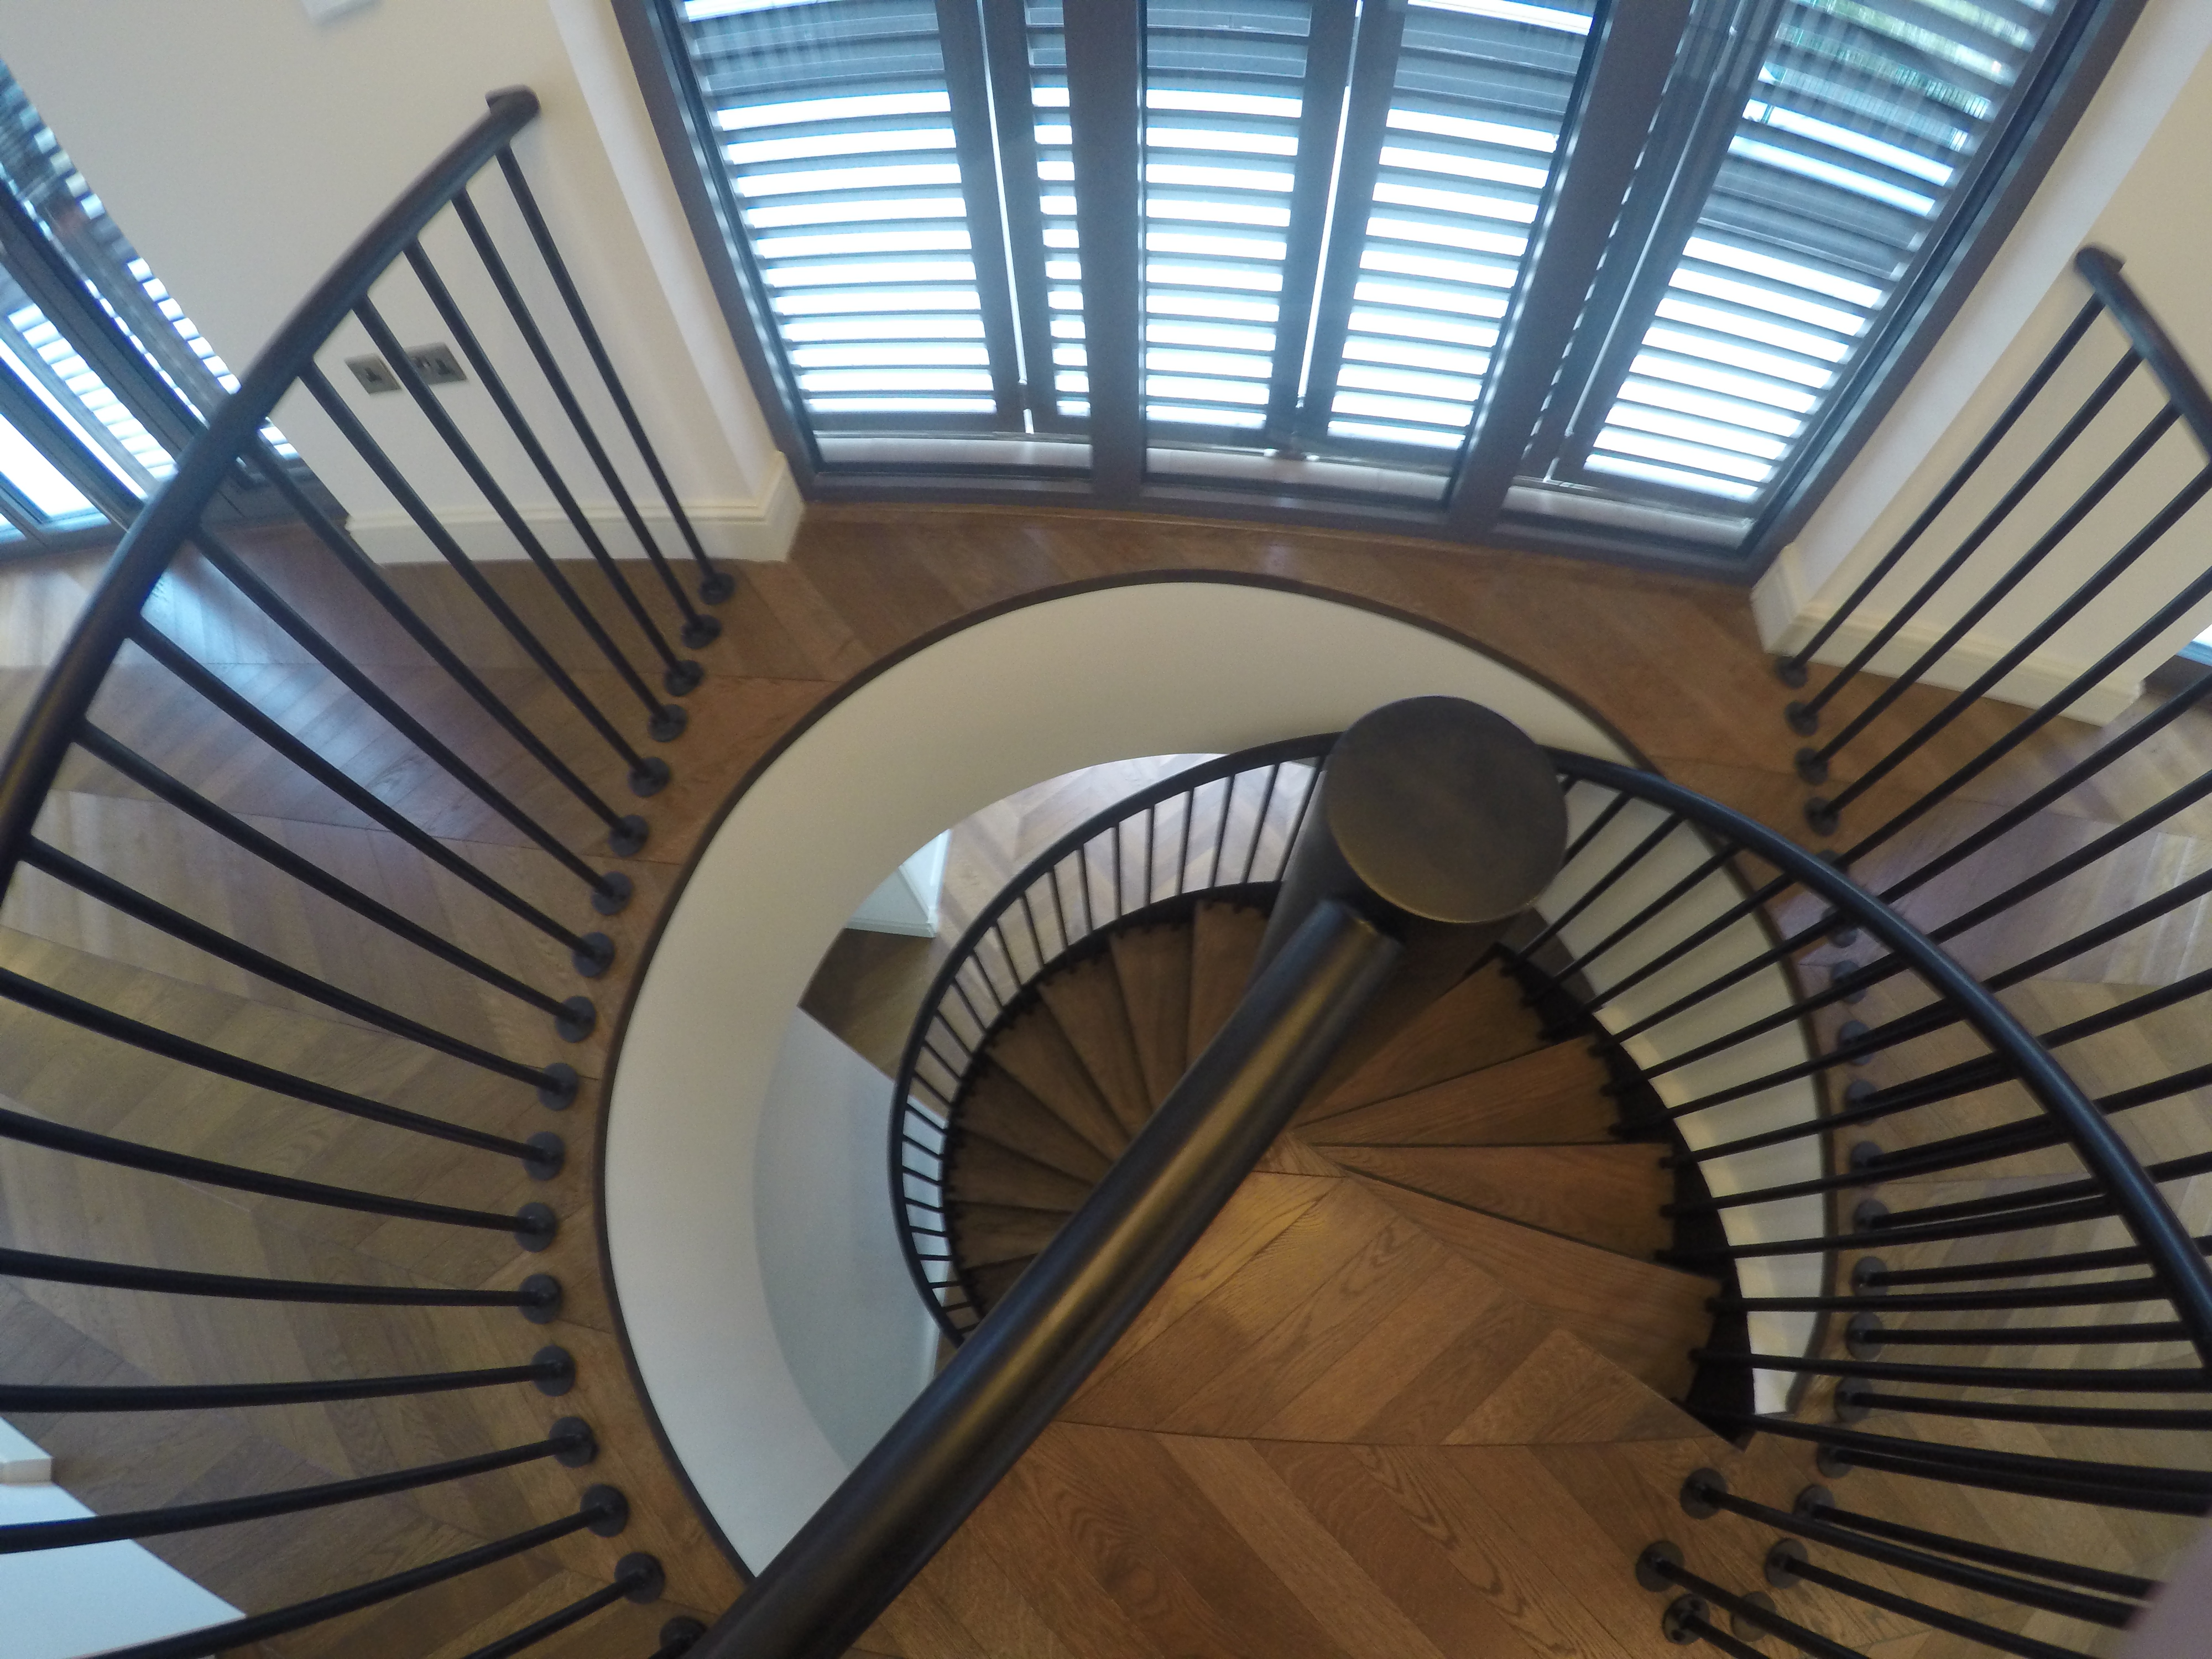 Bespoke Black Mild Steel Spiral Staircase for residential penthouse apartment in London.